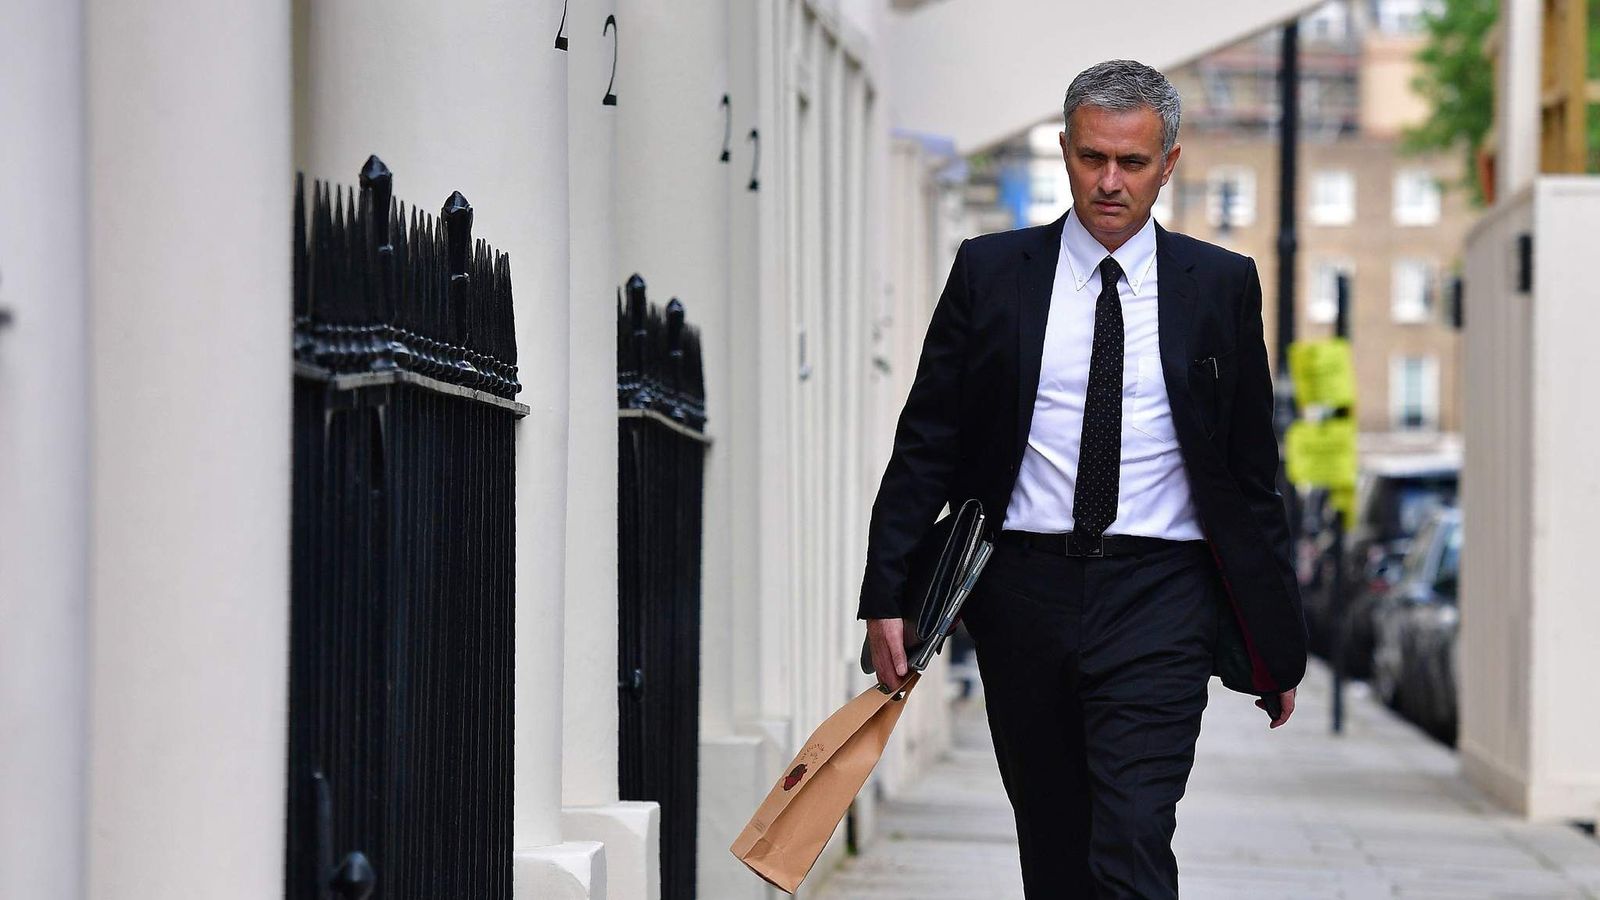 Jose Mourinho Signs Contract To Become Man Utd Manager Scoop News Sky News